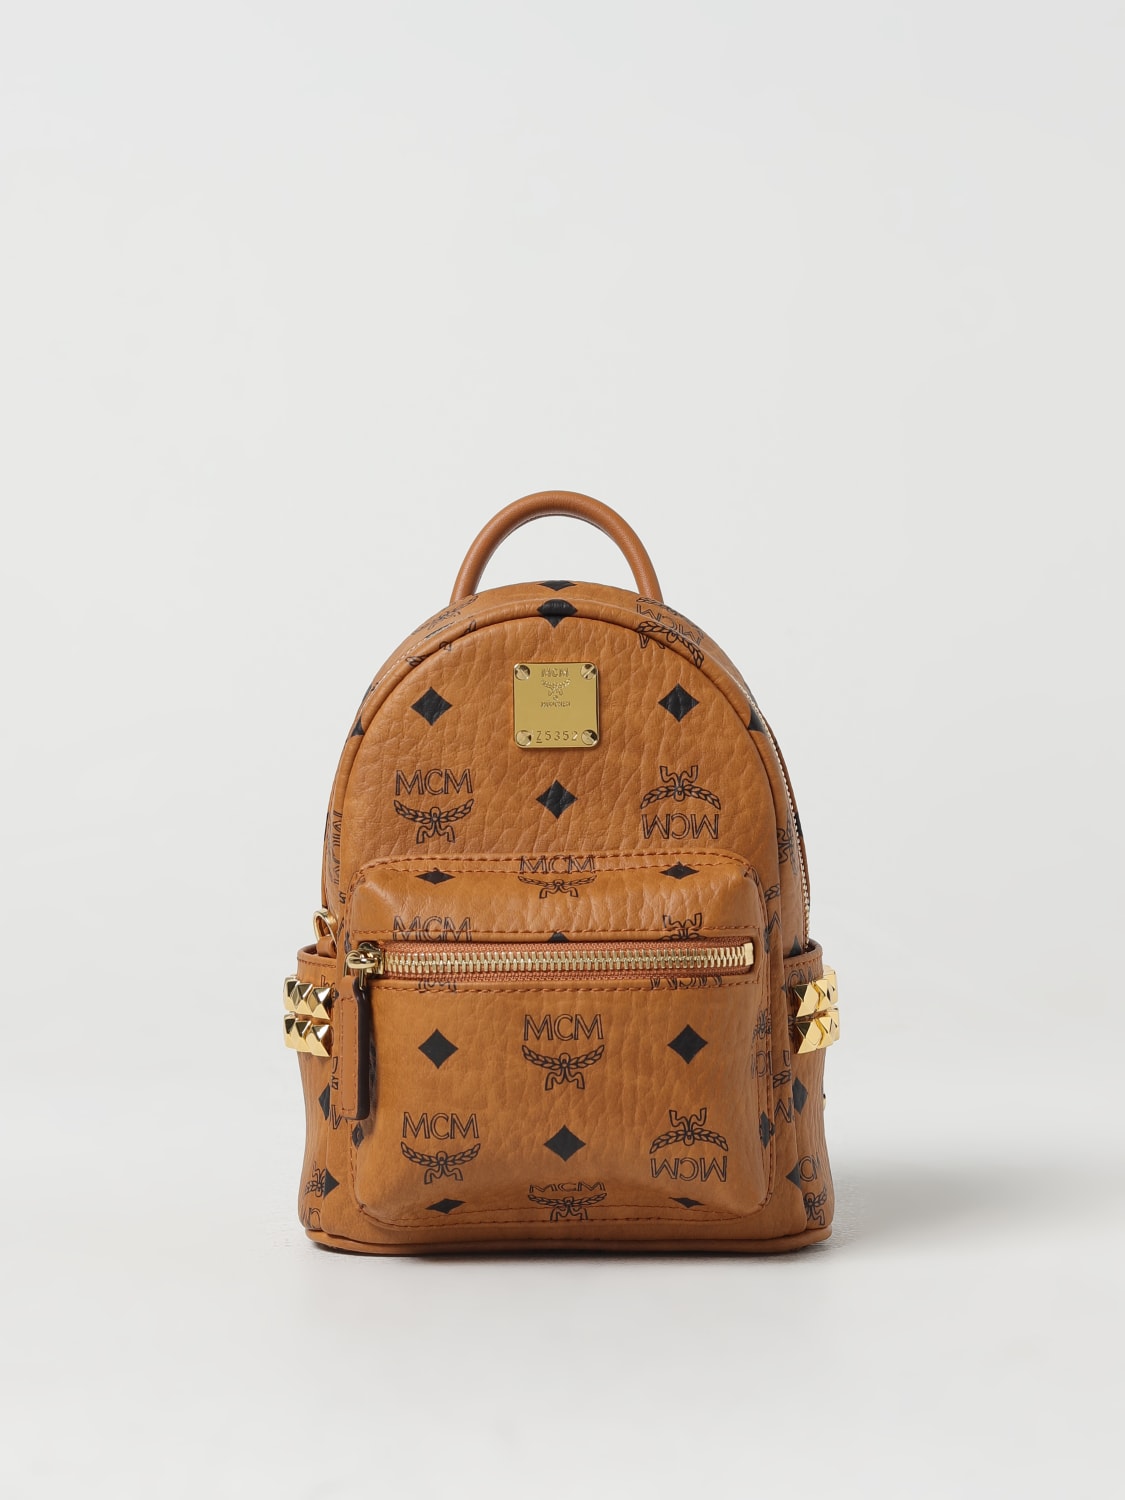 MCM: Backpack woman - Camel | Mcm backpack MMKAAVE13 online at GIGLIO.COM